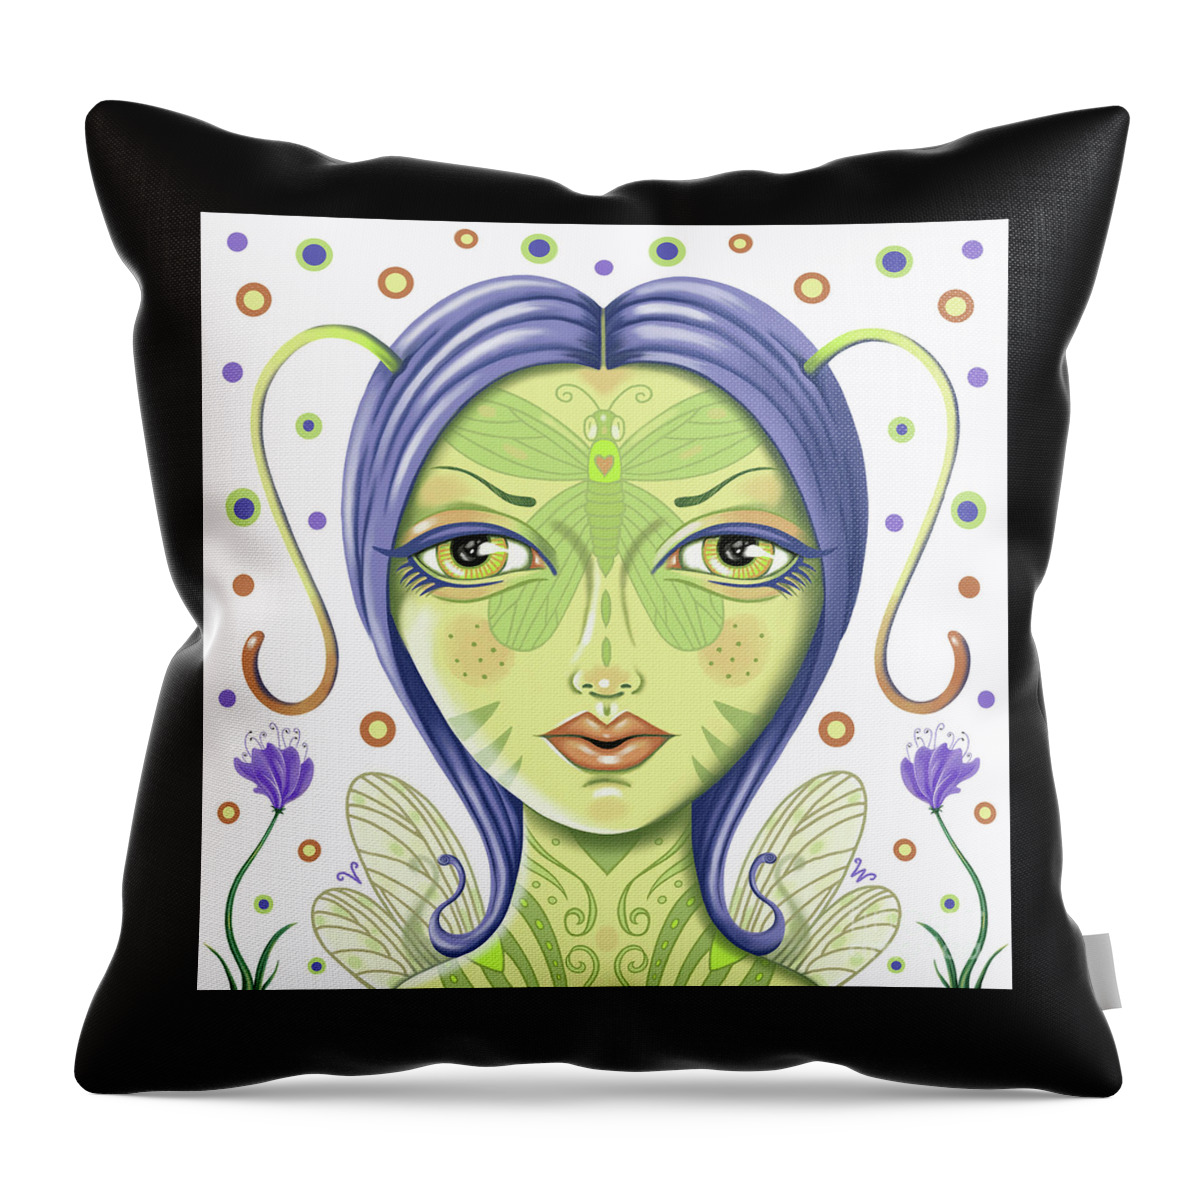 Fantasy Throw Pillow featuring the digital art Insect girl, Antennette - Sq.White by Valerie White